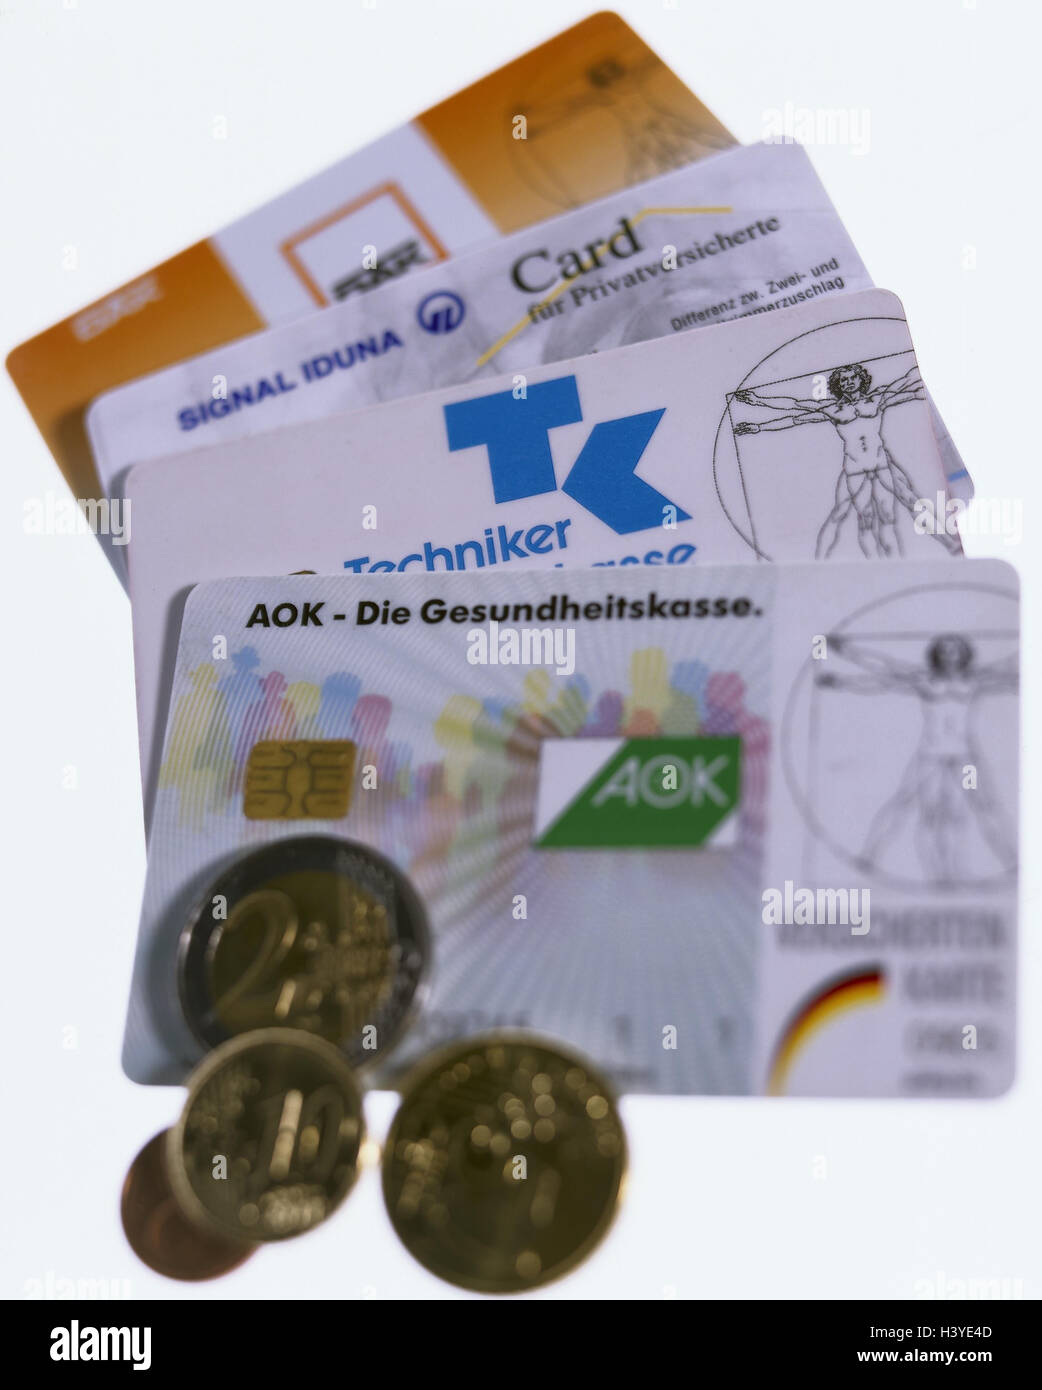 Health insurance cards, health insurances, differently, euro coins public health, health insurance, insurance cards, insurance cards, expenses, cost projection, increase in contributions, rise in price, money, coins, copy spaces, Still life Stock Photo